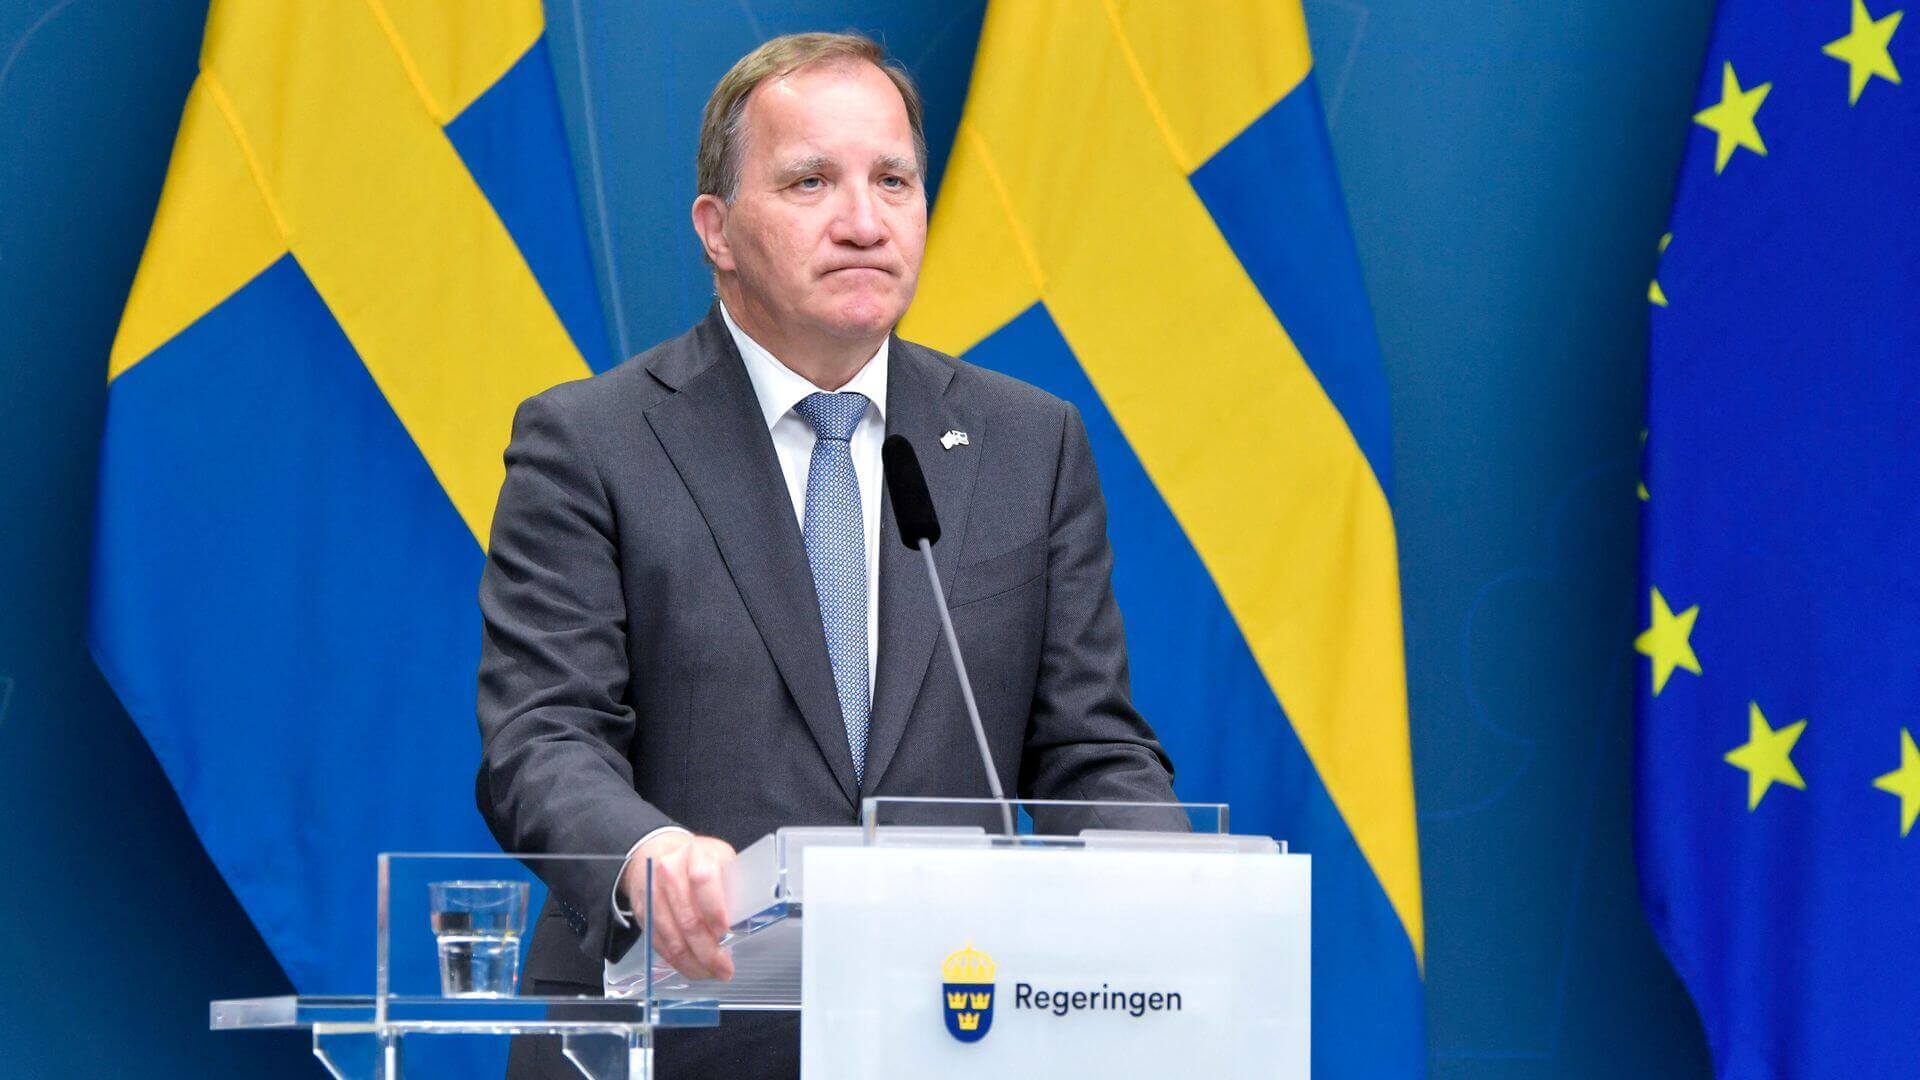 Ruling Government in Sweden Toppled as PM Löfven Loses Confidence Vote